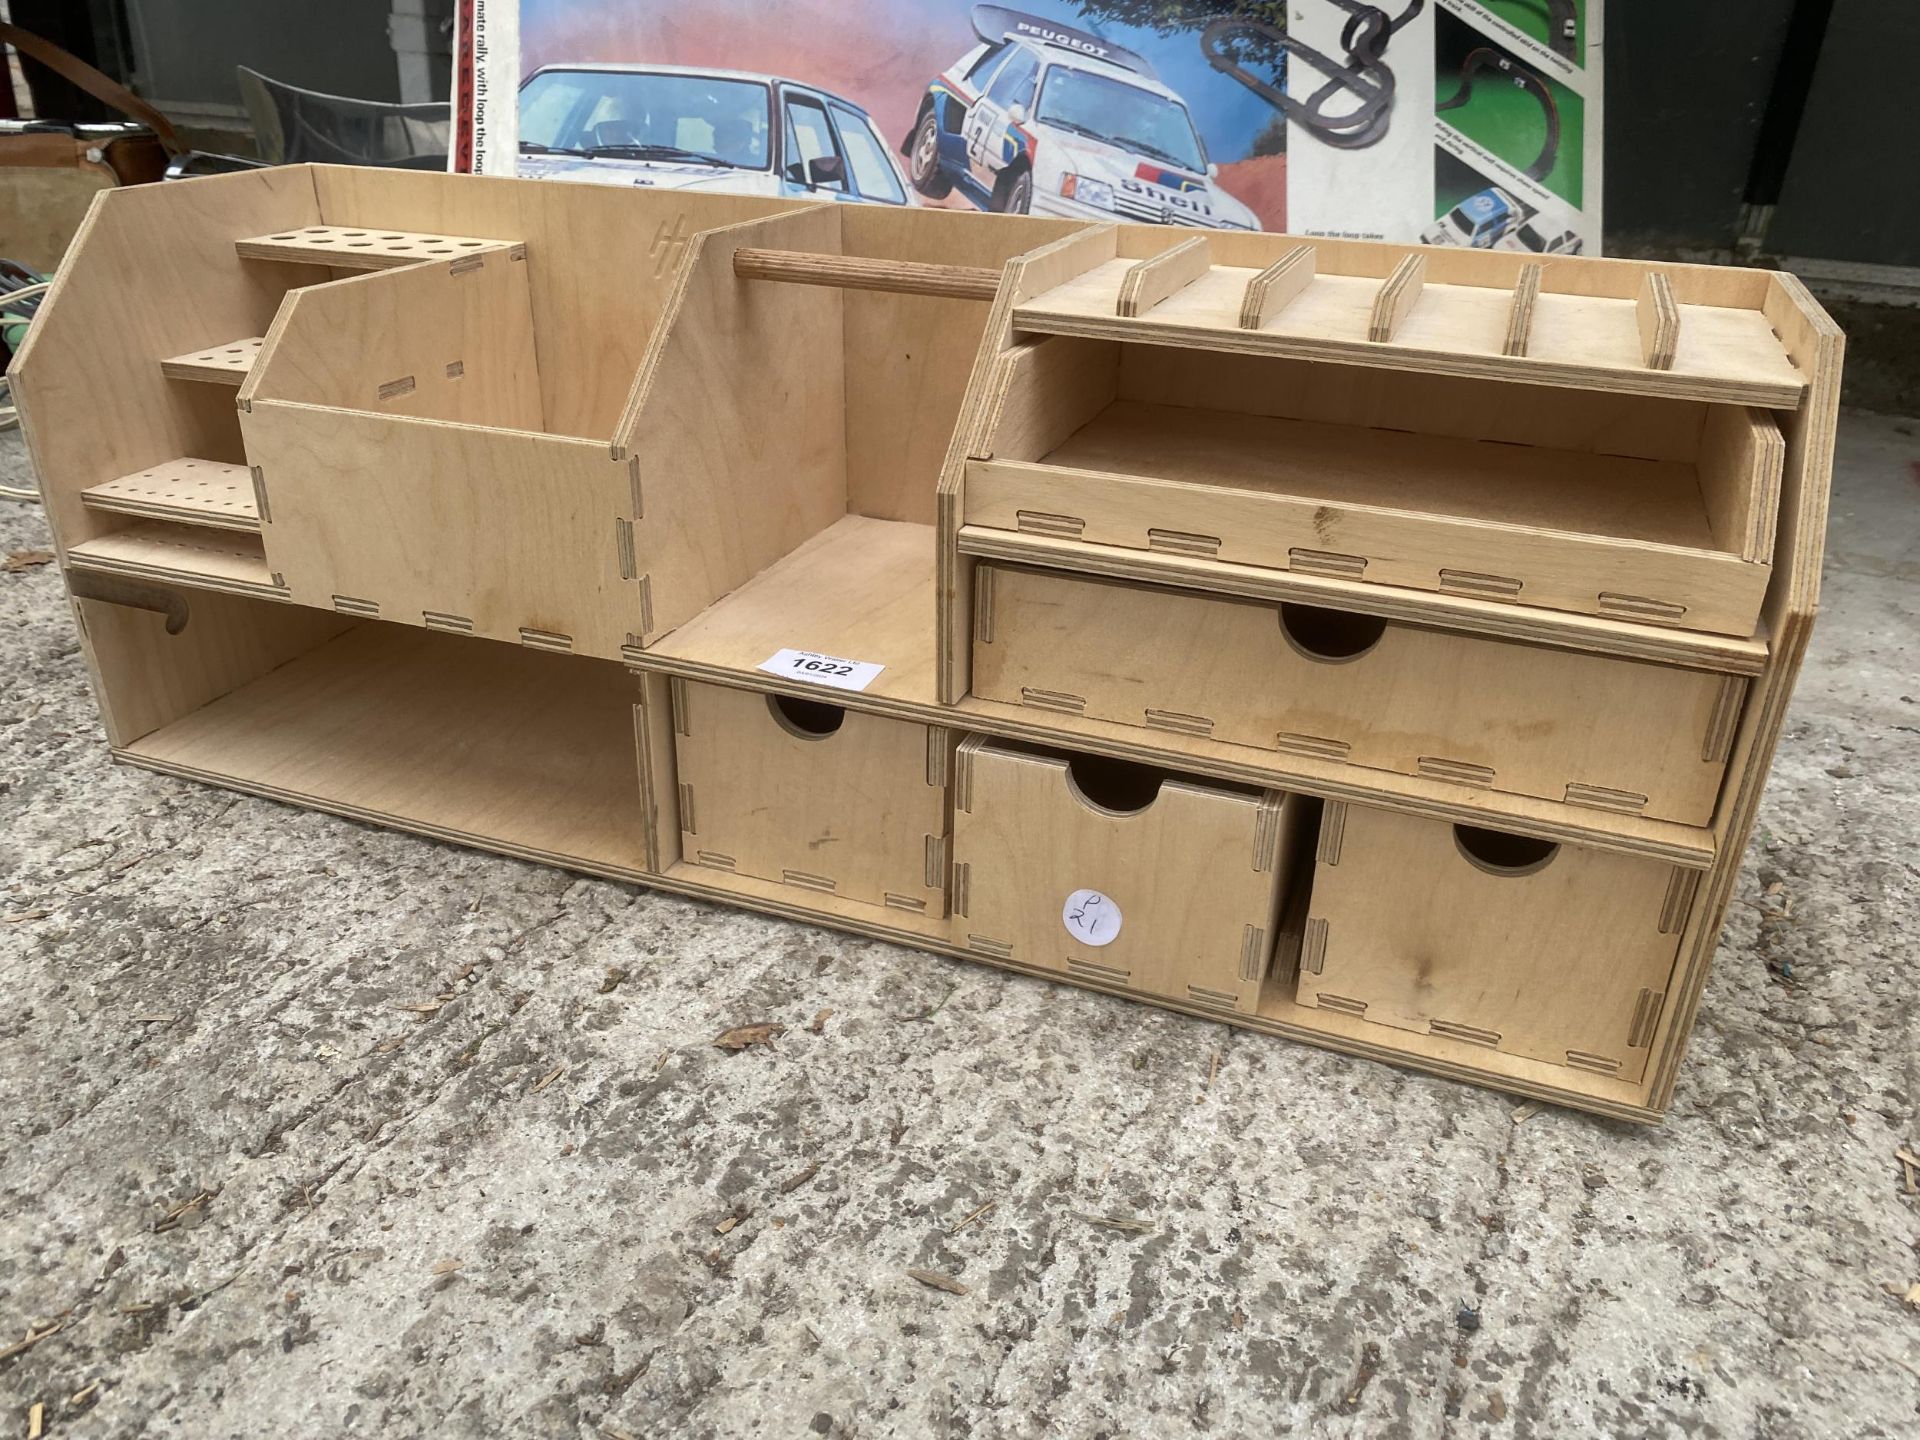 A WOODEN DESK TIDY STORAGE UNIT - Image 2 of 4